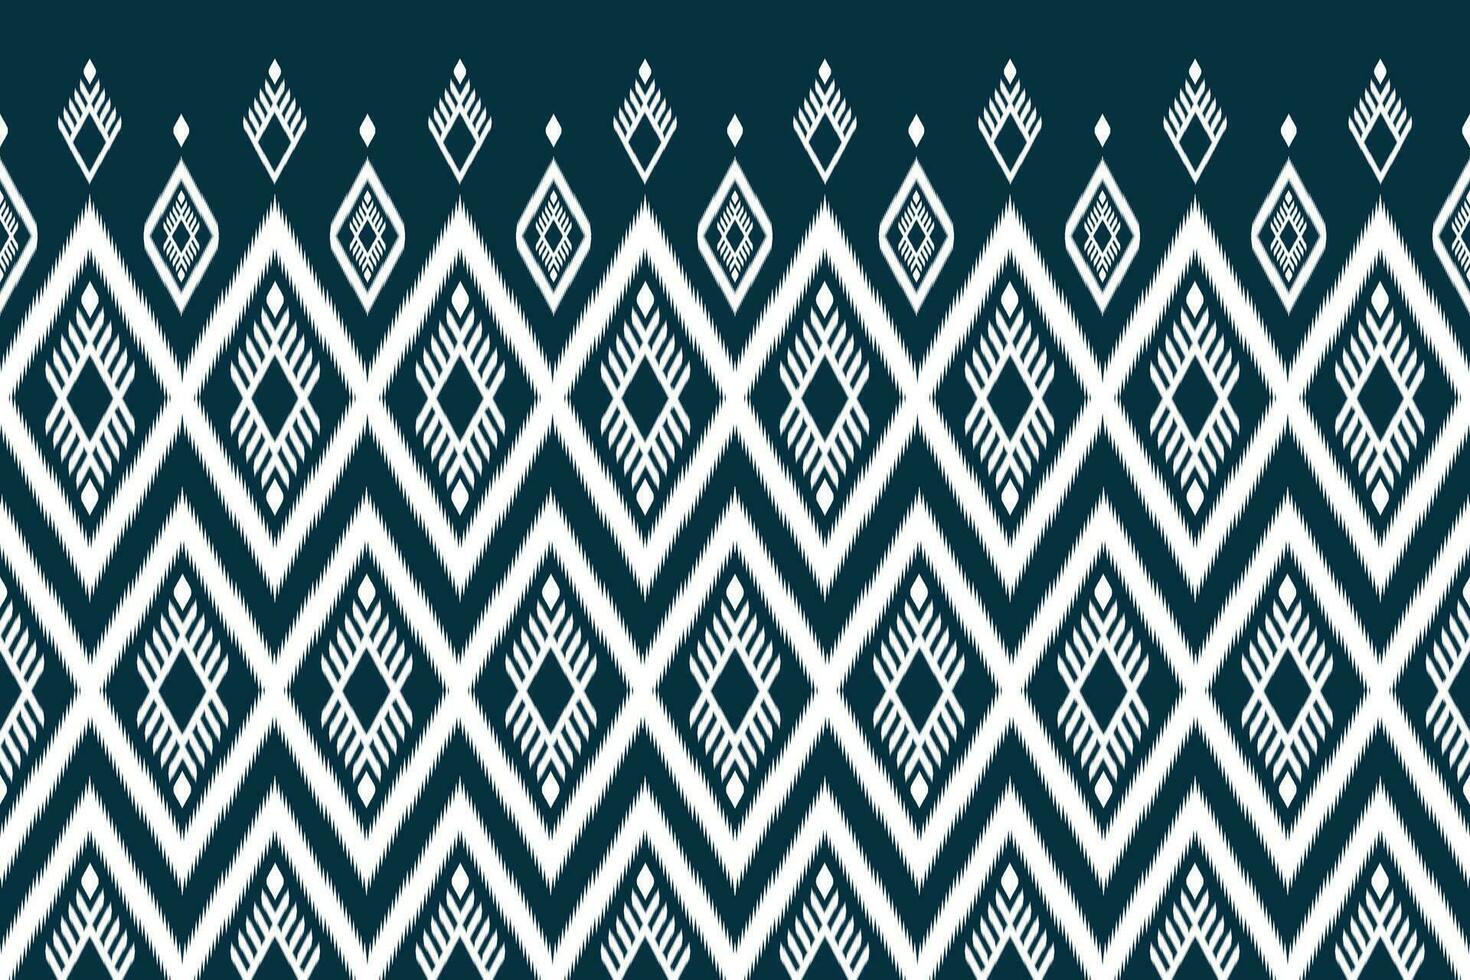 Seamless abstract ikat pattern abstract background for textile design. Can be used in fabric design for clothes, accessories, decorative paper, wrapping, Vector, illustration, carpet vector